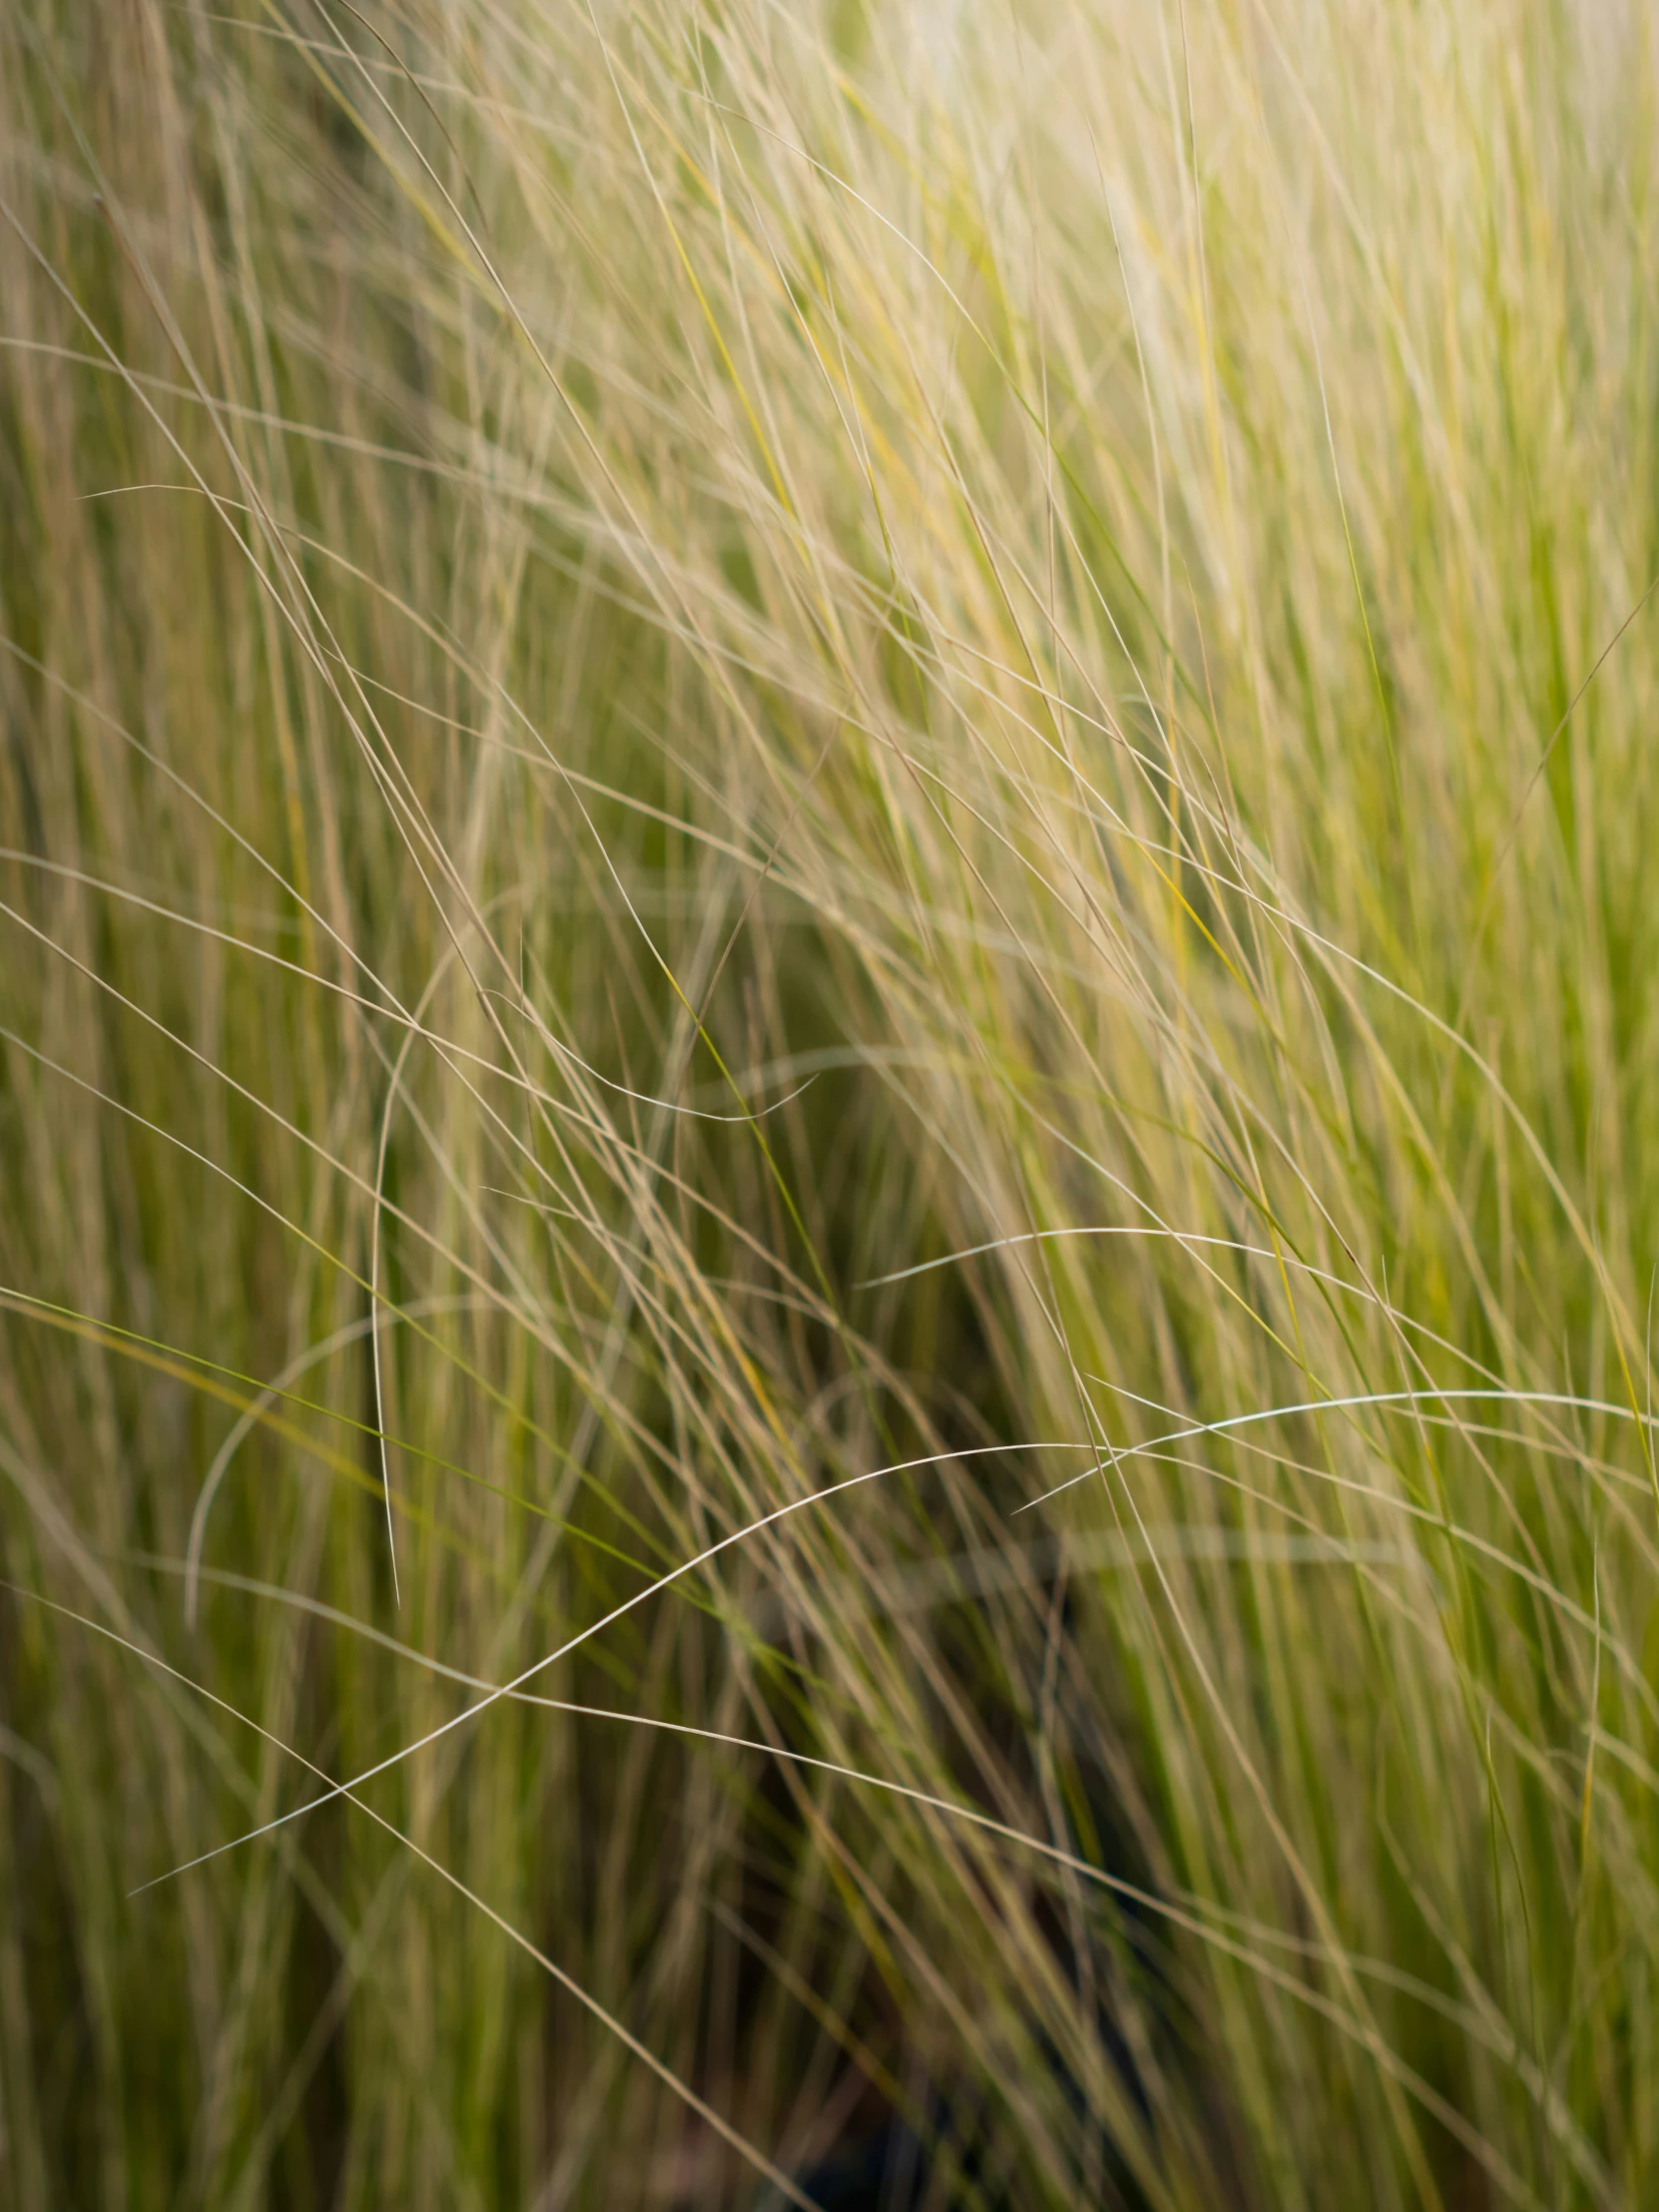 a tall grass field with a blurry background